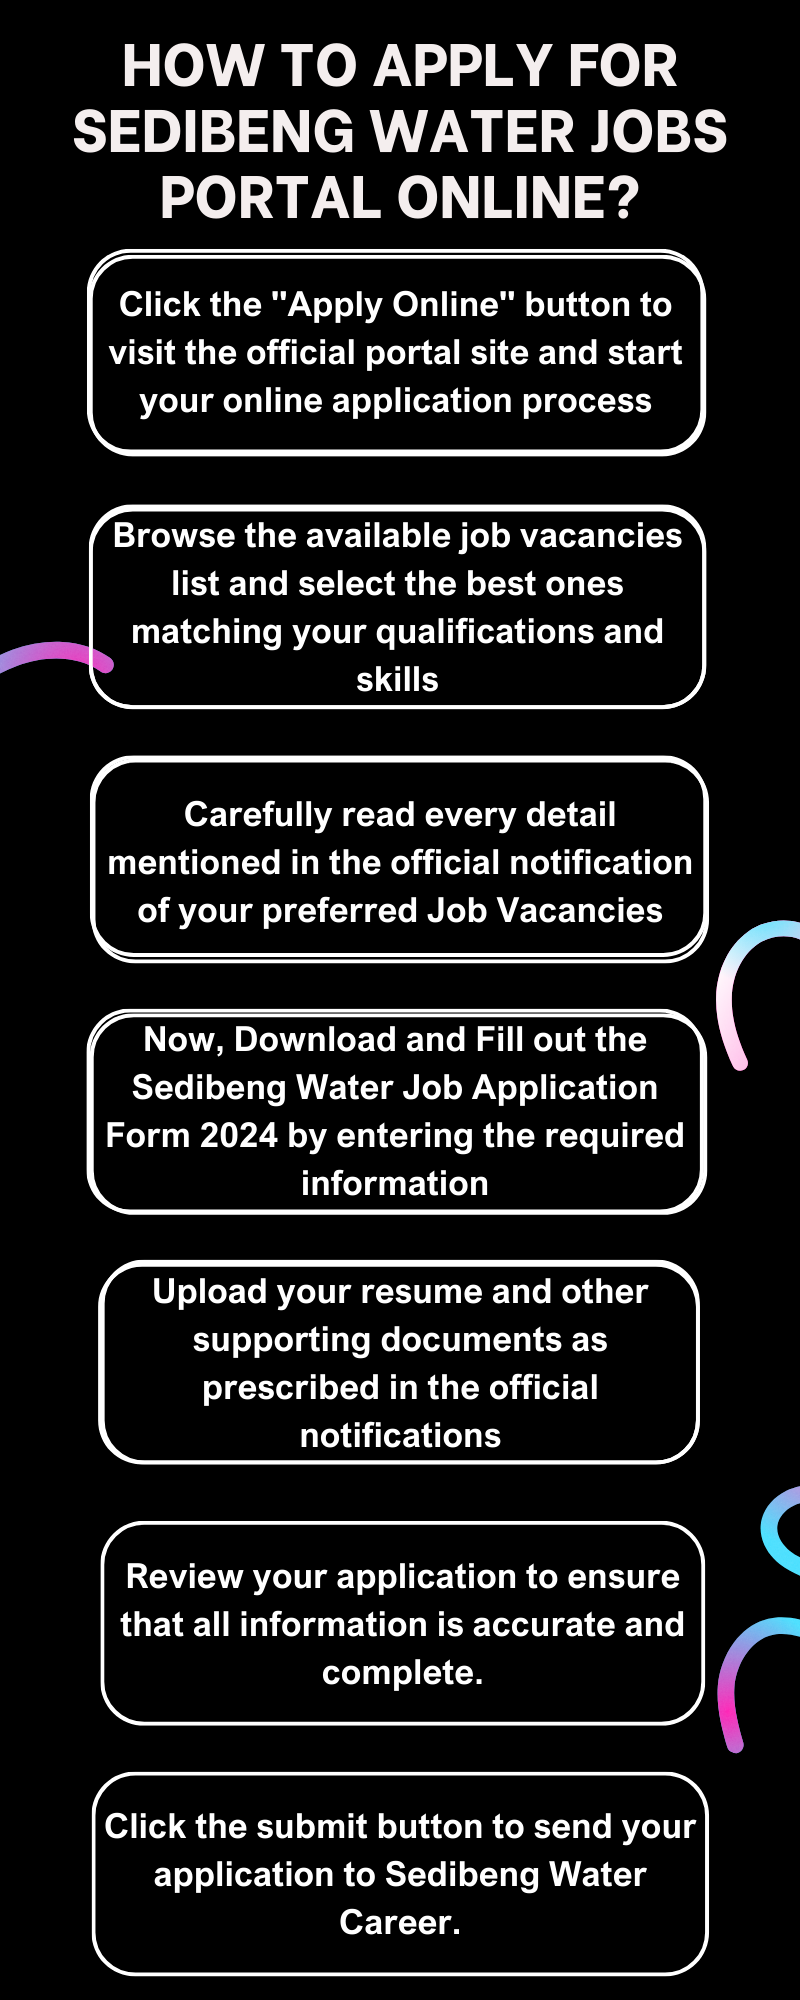 How To Apply for Sedibeng Water Jobs Portal Online?